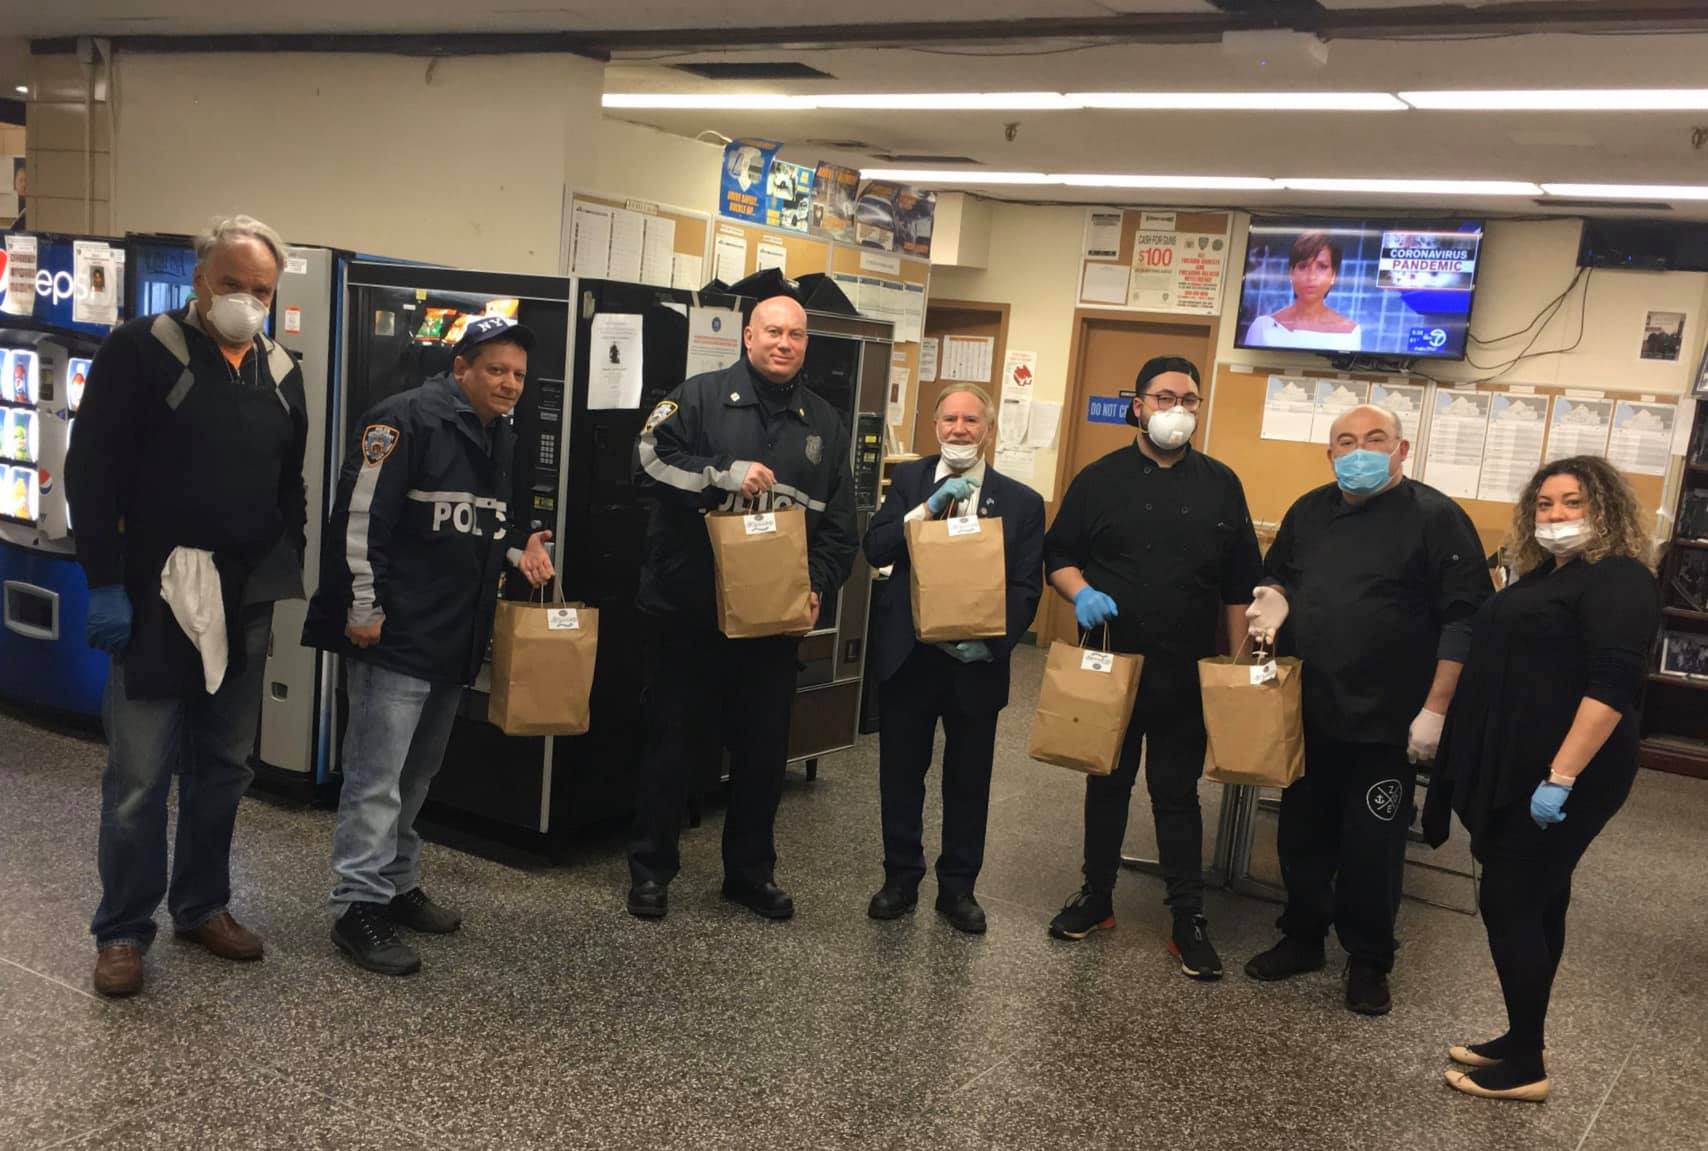 Assemblyman Colton Personally Delivers Hot Meals to the First Responders